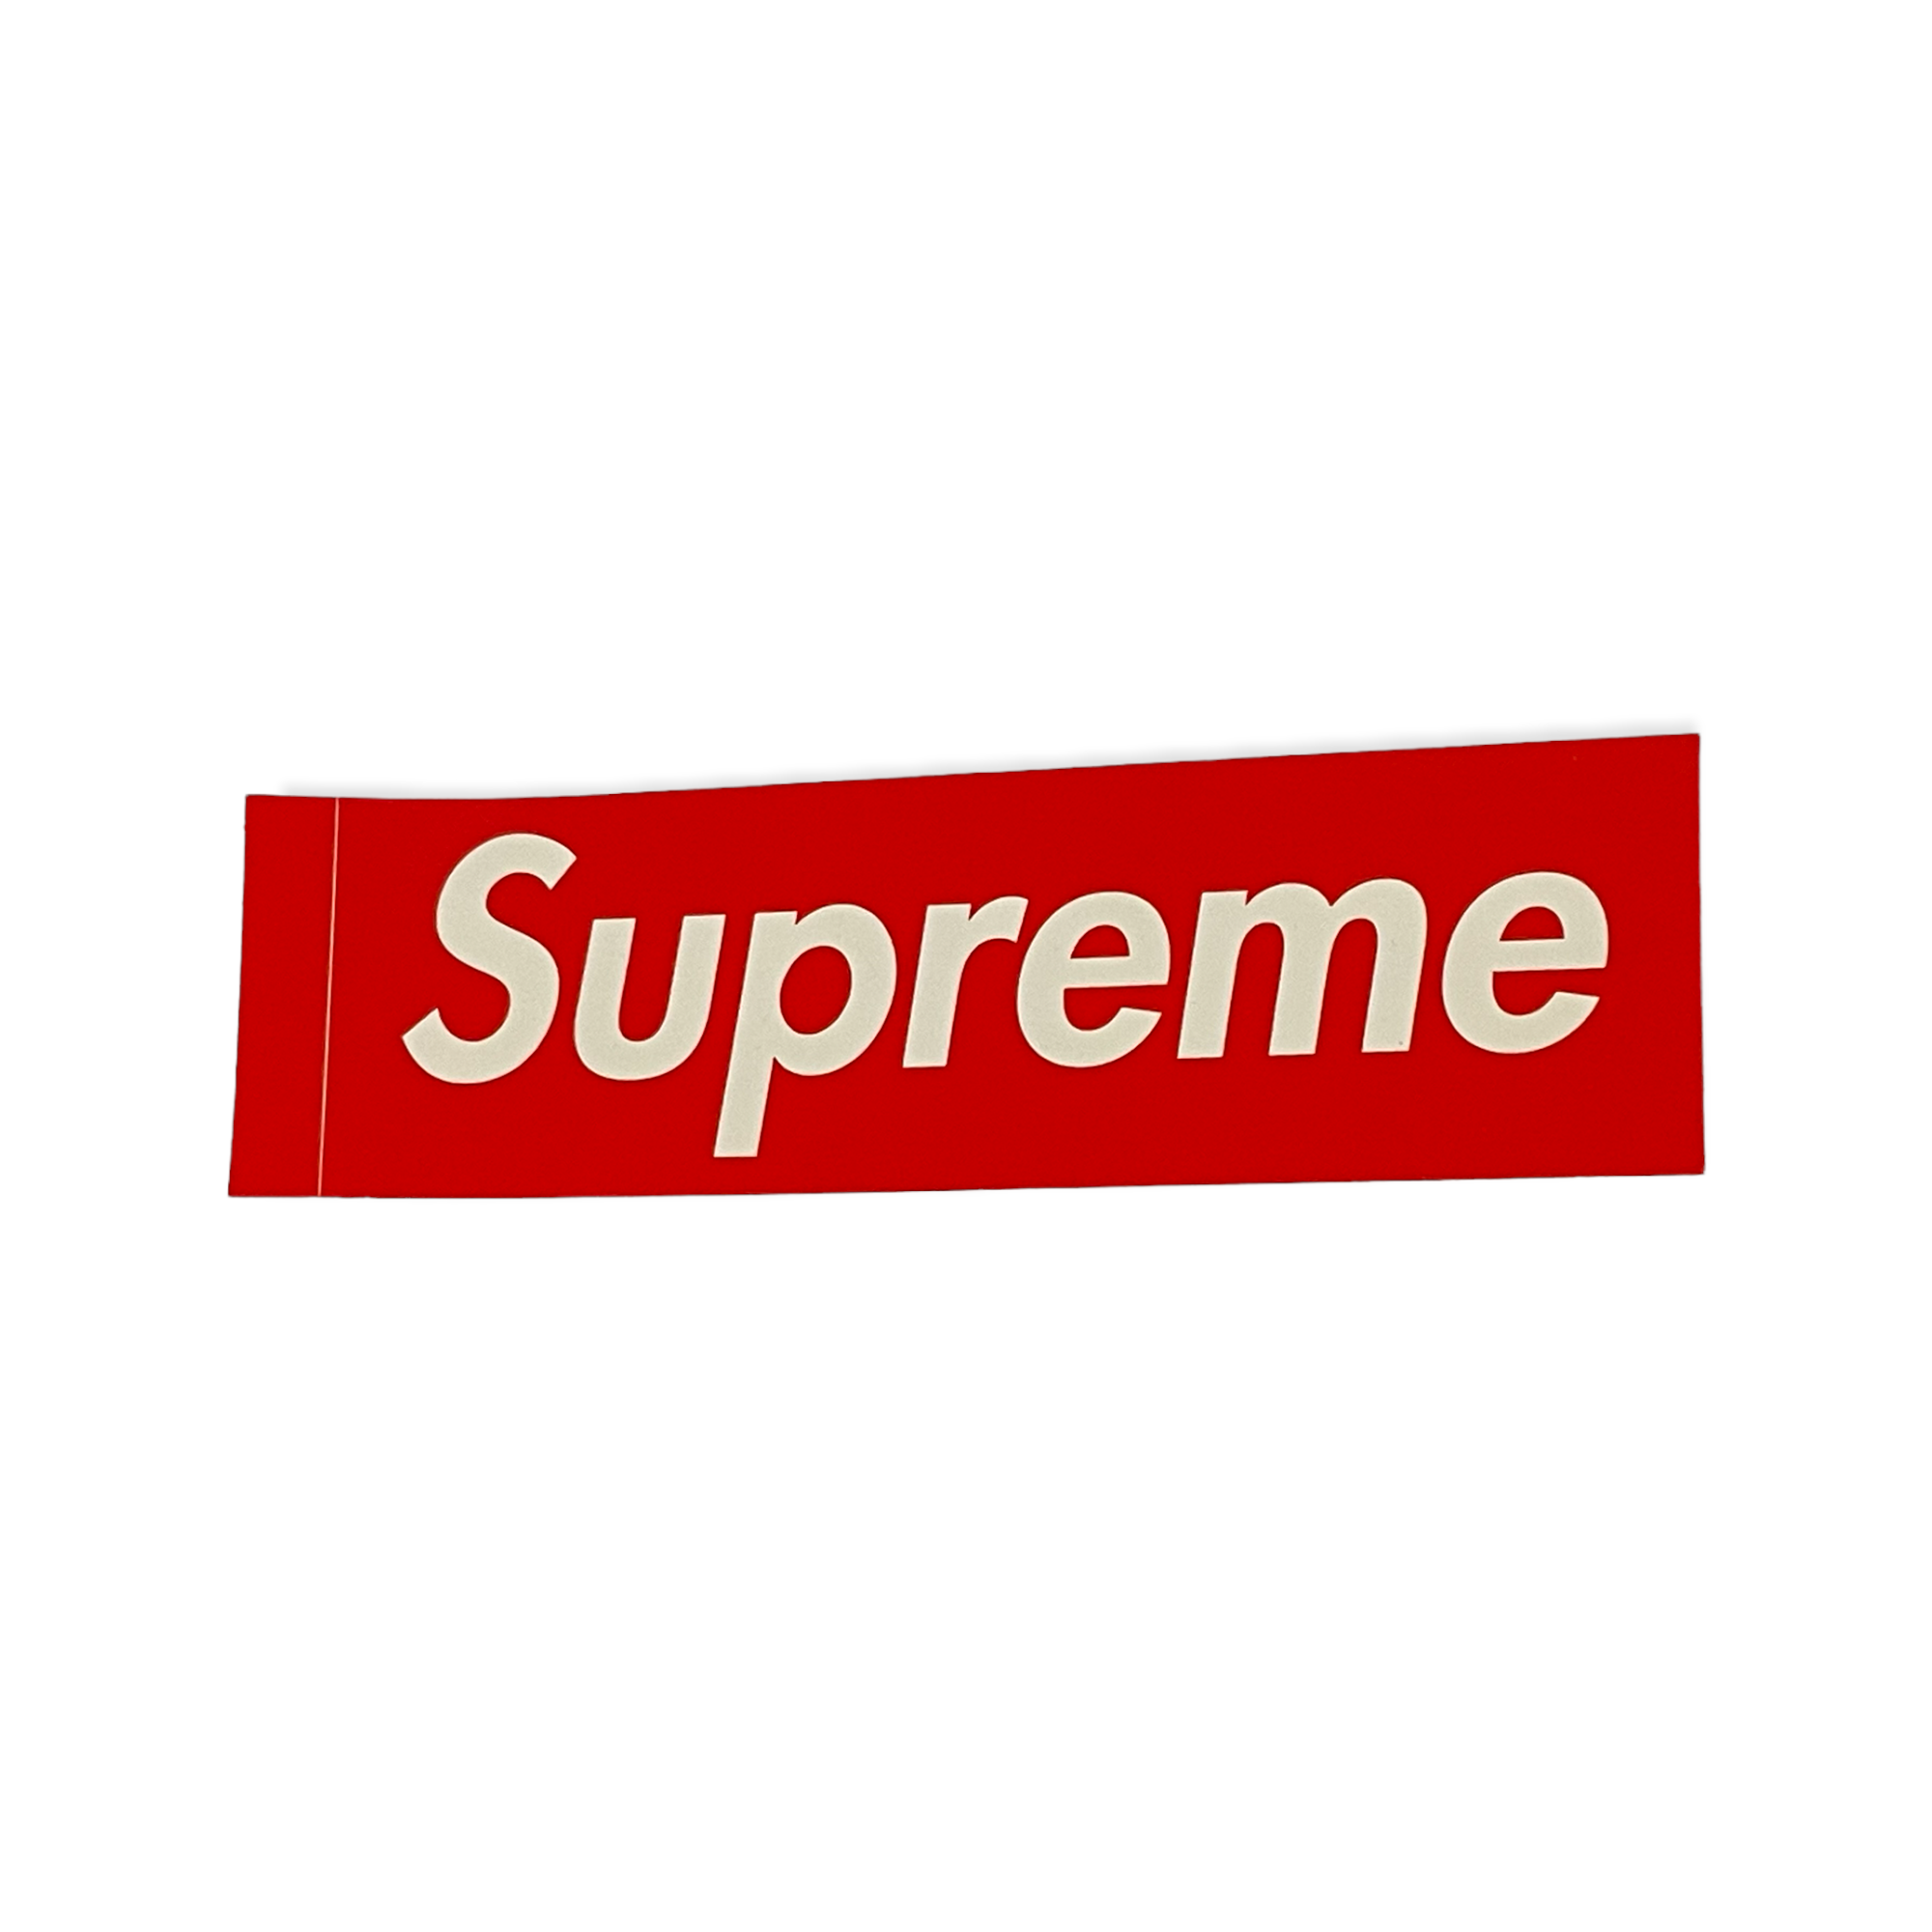 Supreme Shower Cap, Playing Cards, Rubber Gloves & One Large Sticker